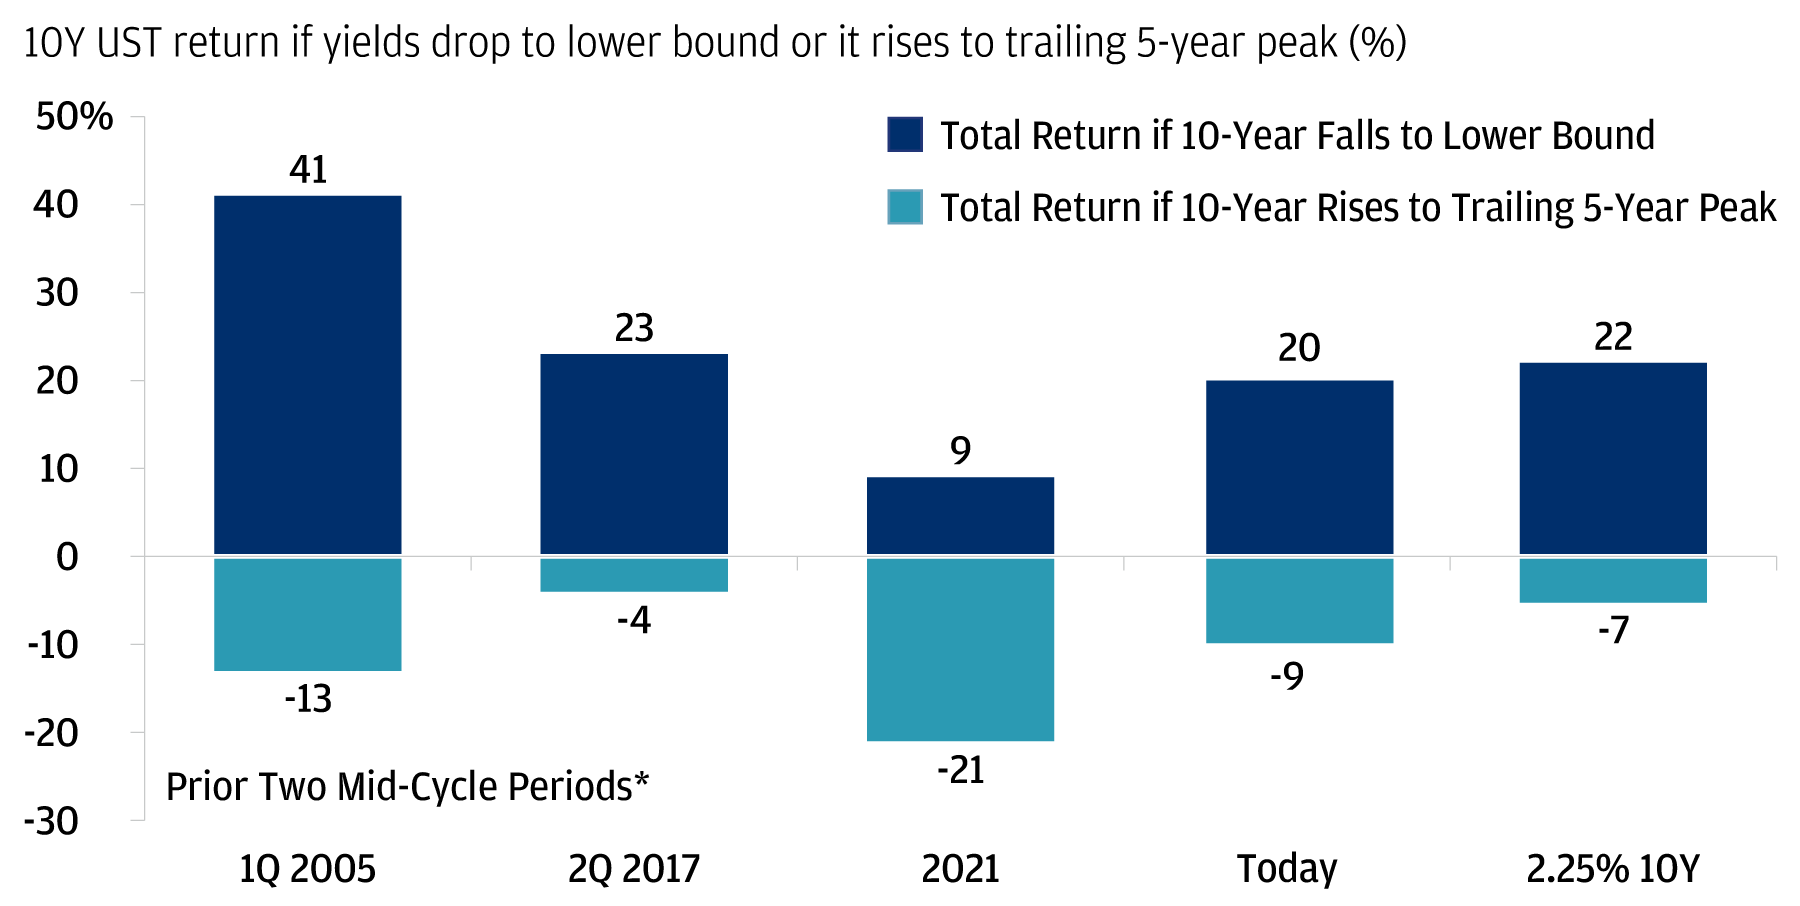 This chart shows the return a 10-year U.S. Treasury would generate over a year if yields were to decline to 0% or rise to their trailing five-year peak at different points in time.